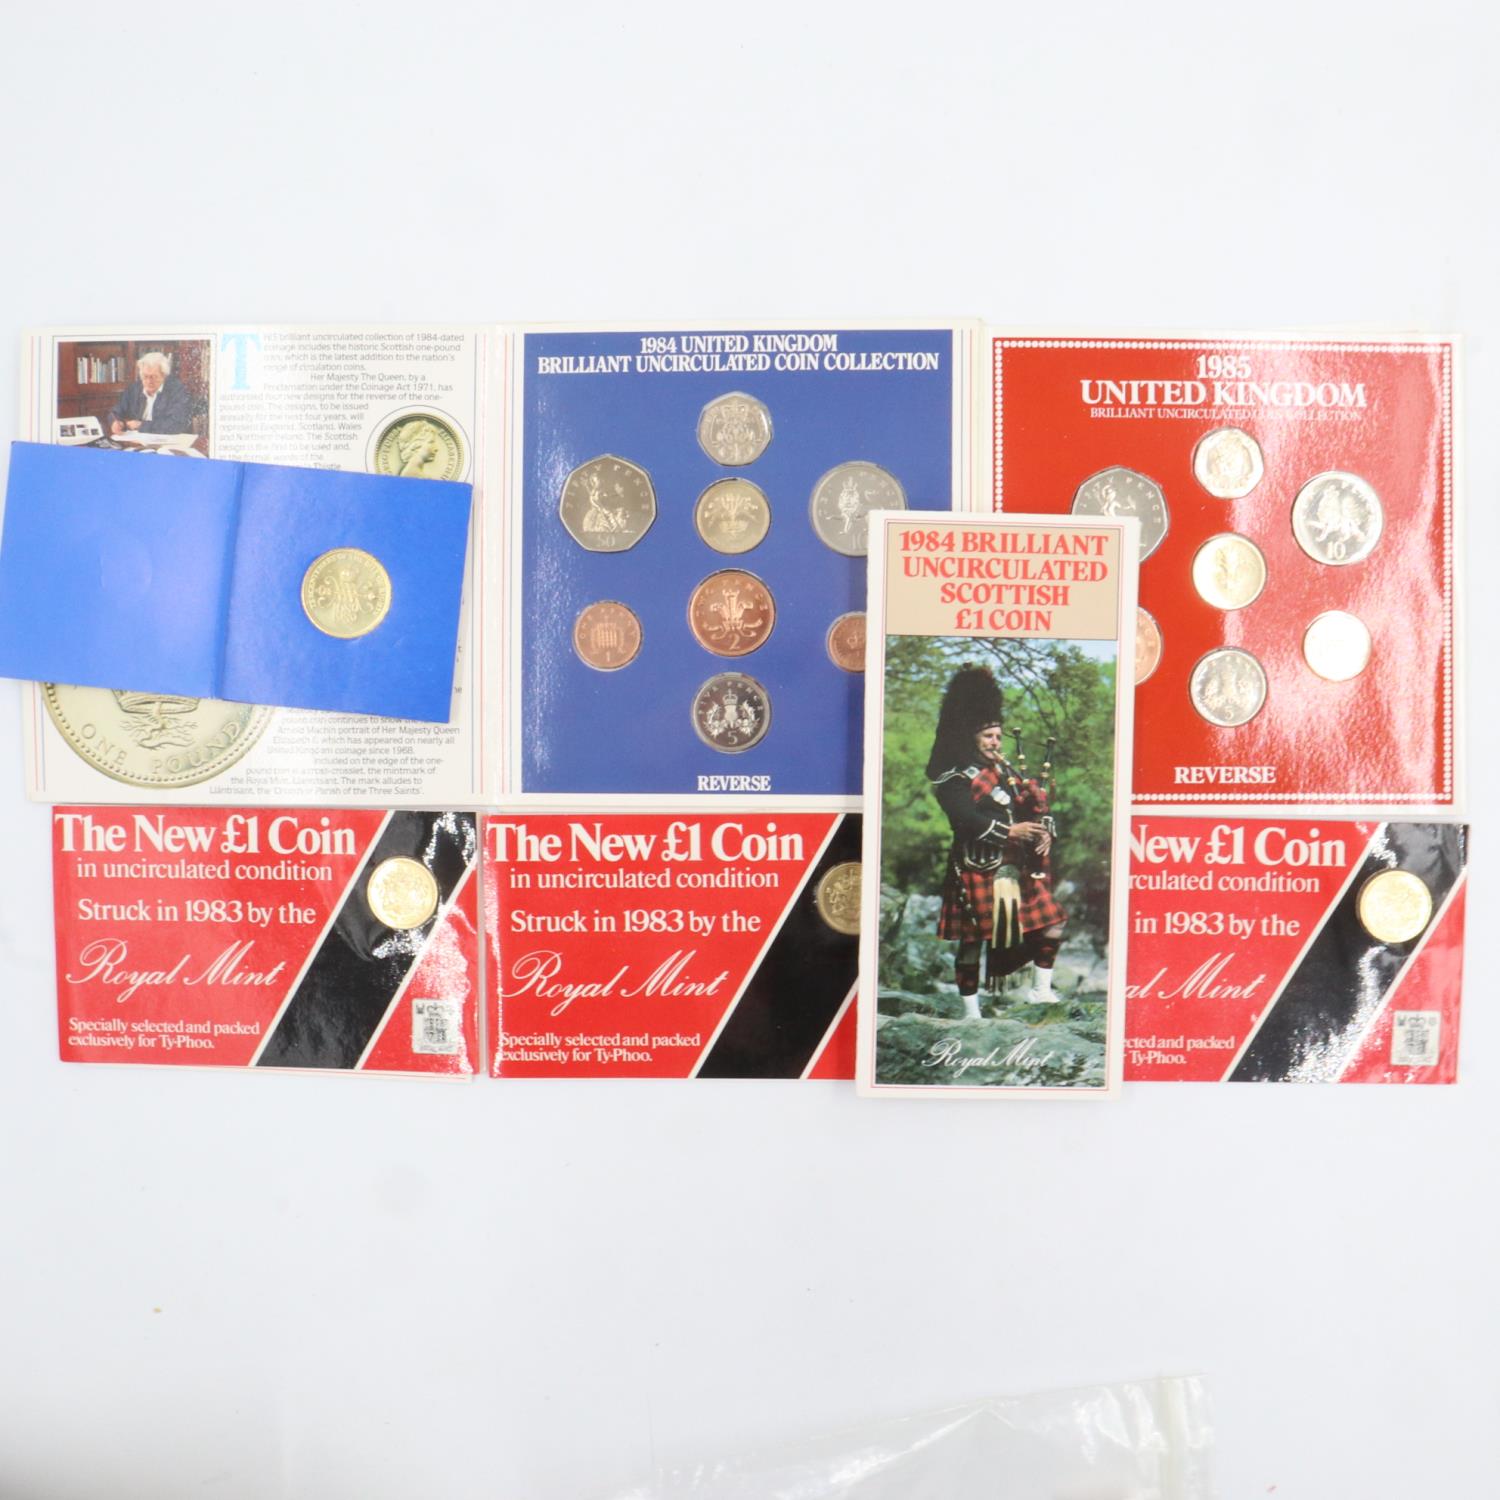 UK uncirculated coins, including 1984 and 1985 sets, £1 and £2 coins. UK P&P Group 1 (£16+VAT for